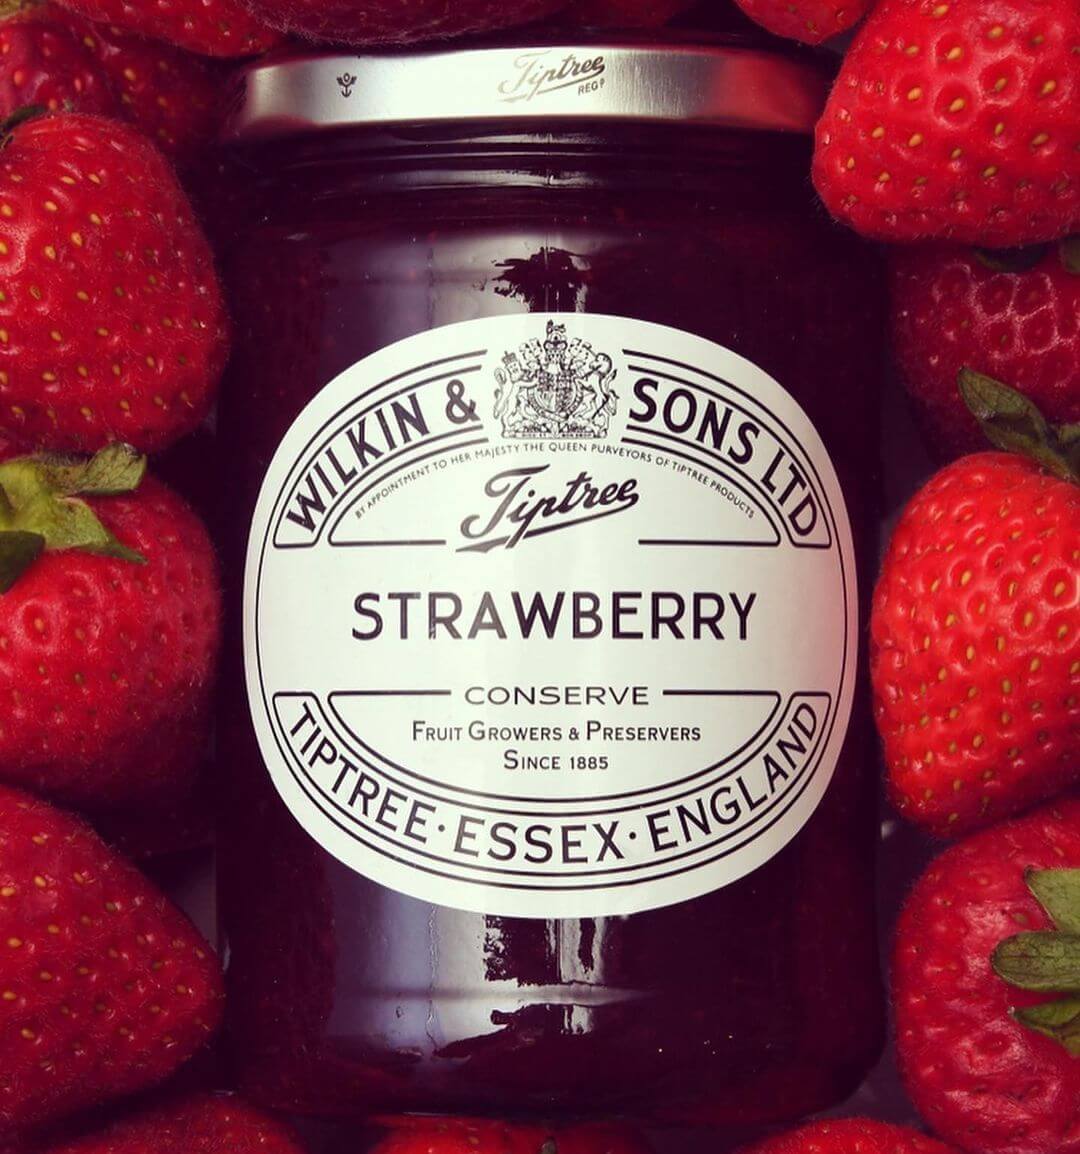 Image of Tiptree Strawberry Conserve made in the UK by Wilkin & Sons. Buying this product supports a UK business, jobs and the local community